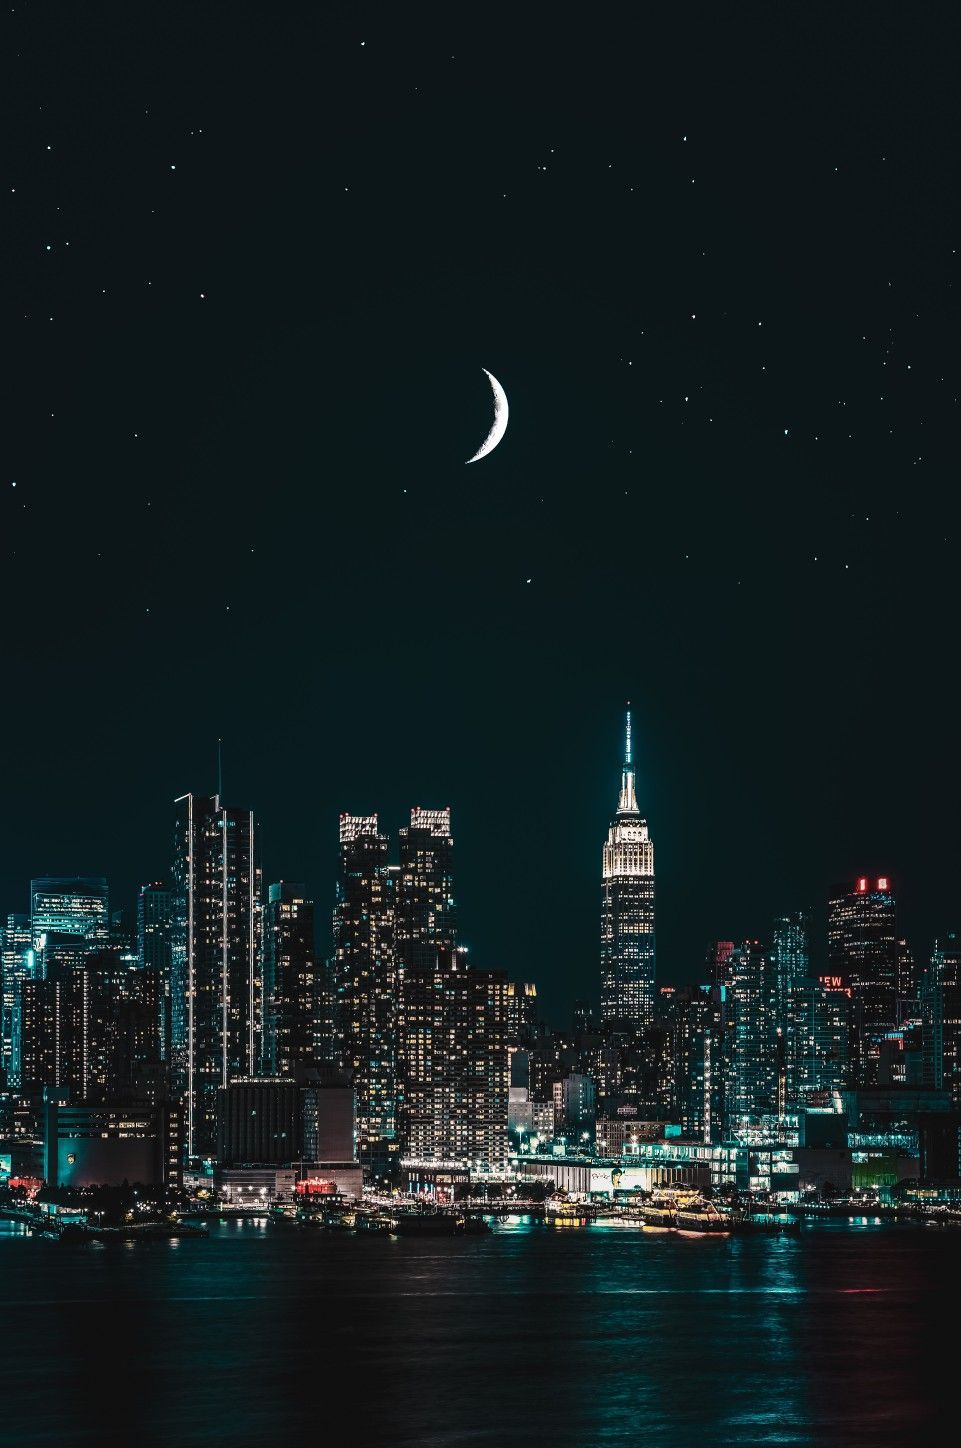 1500 Night Sky Moon Pictures  Download Free Images on Unsplash